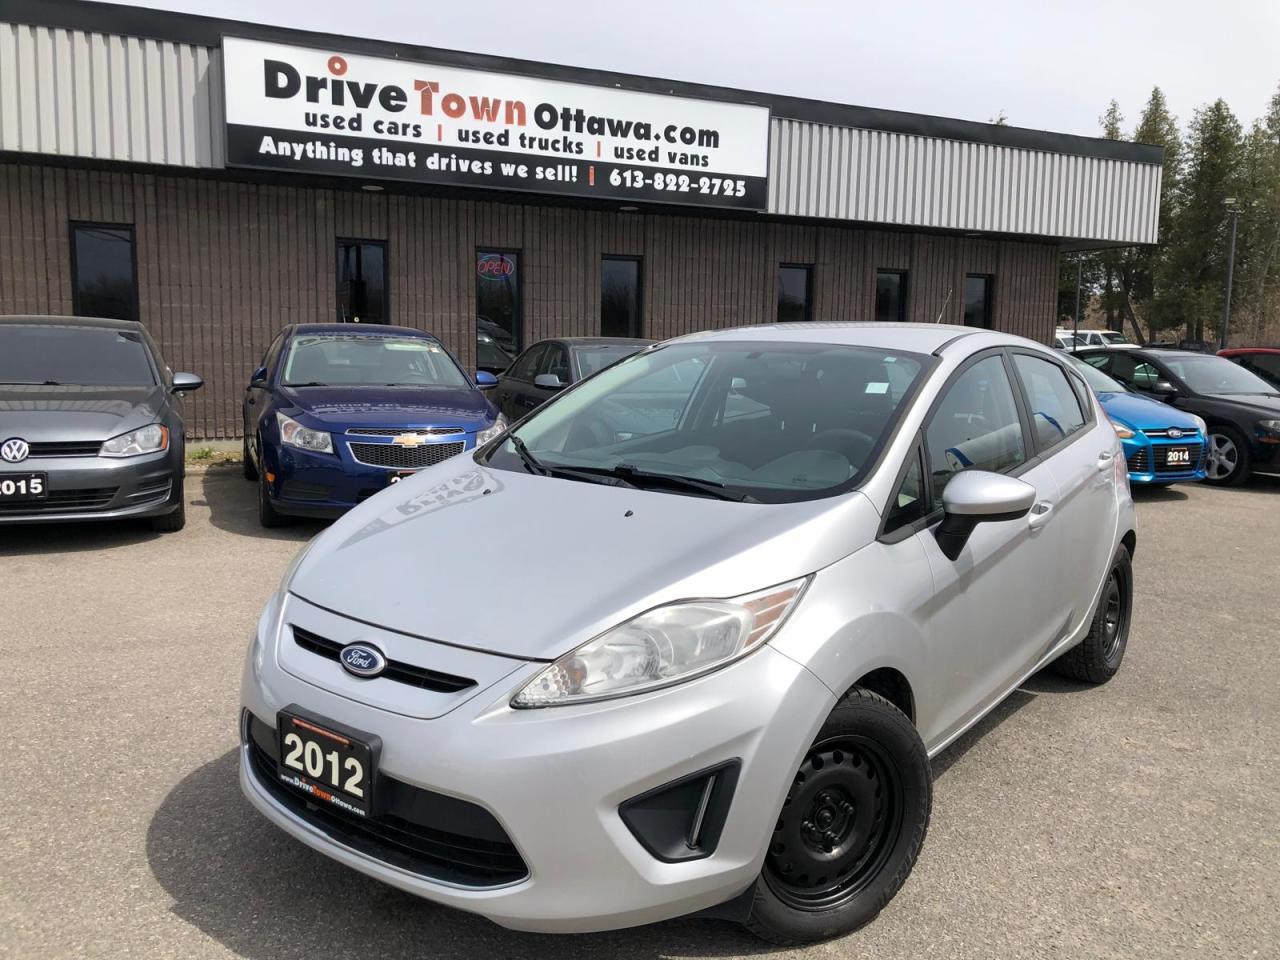 2012 Ford Fiesta sold as is SE